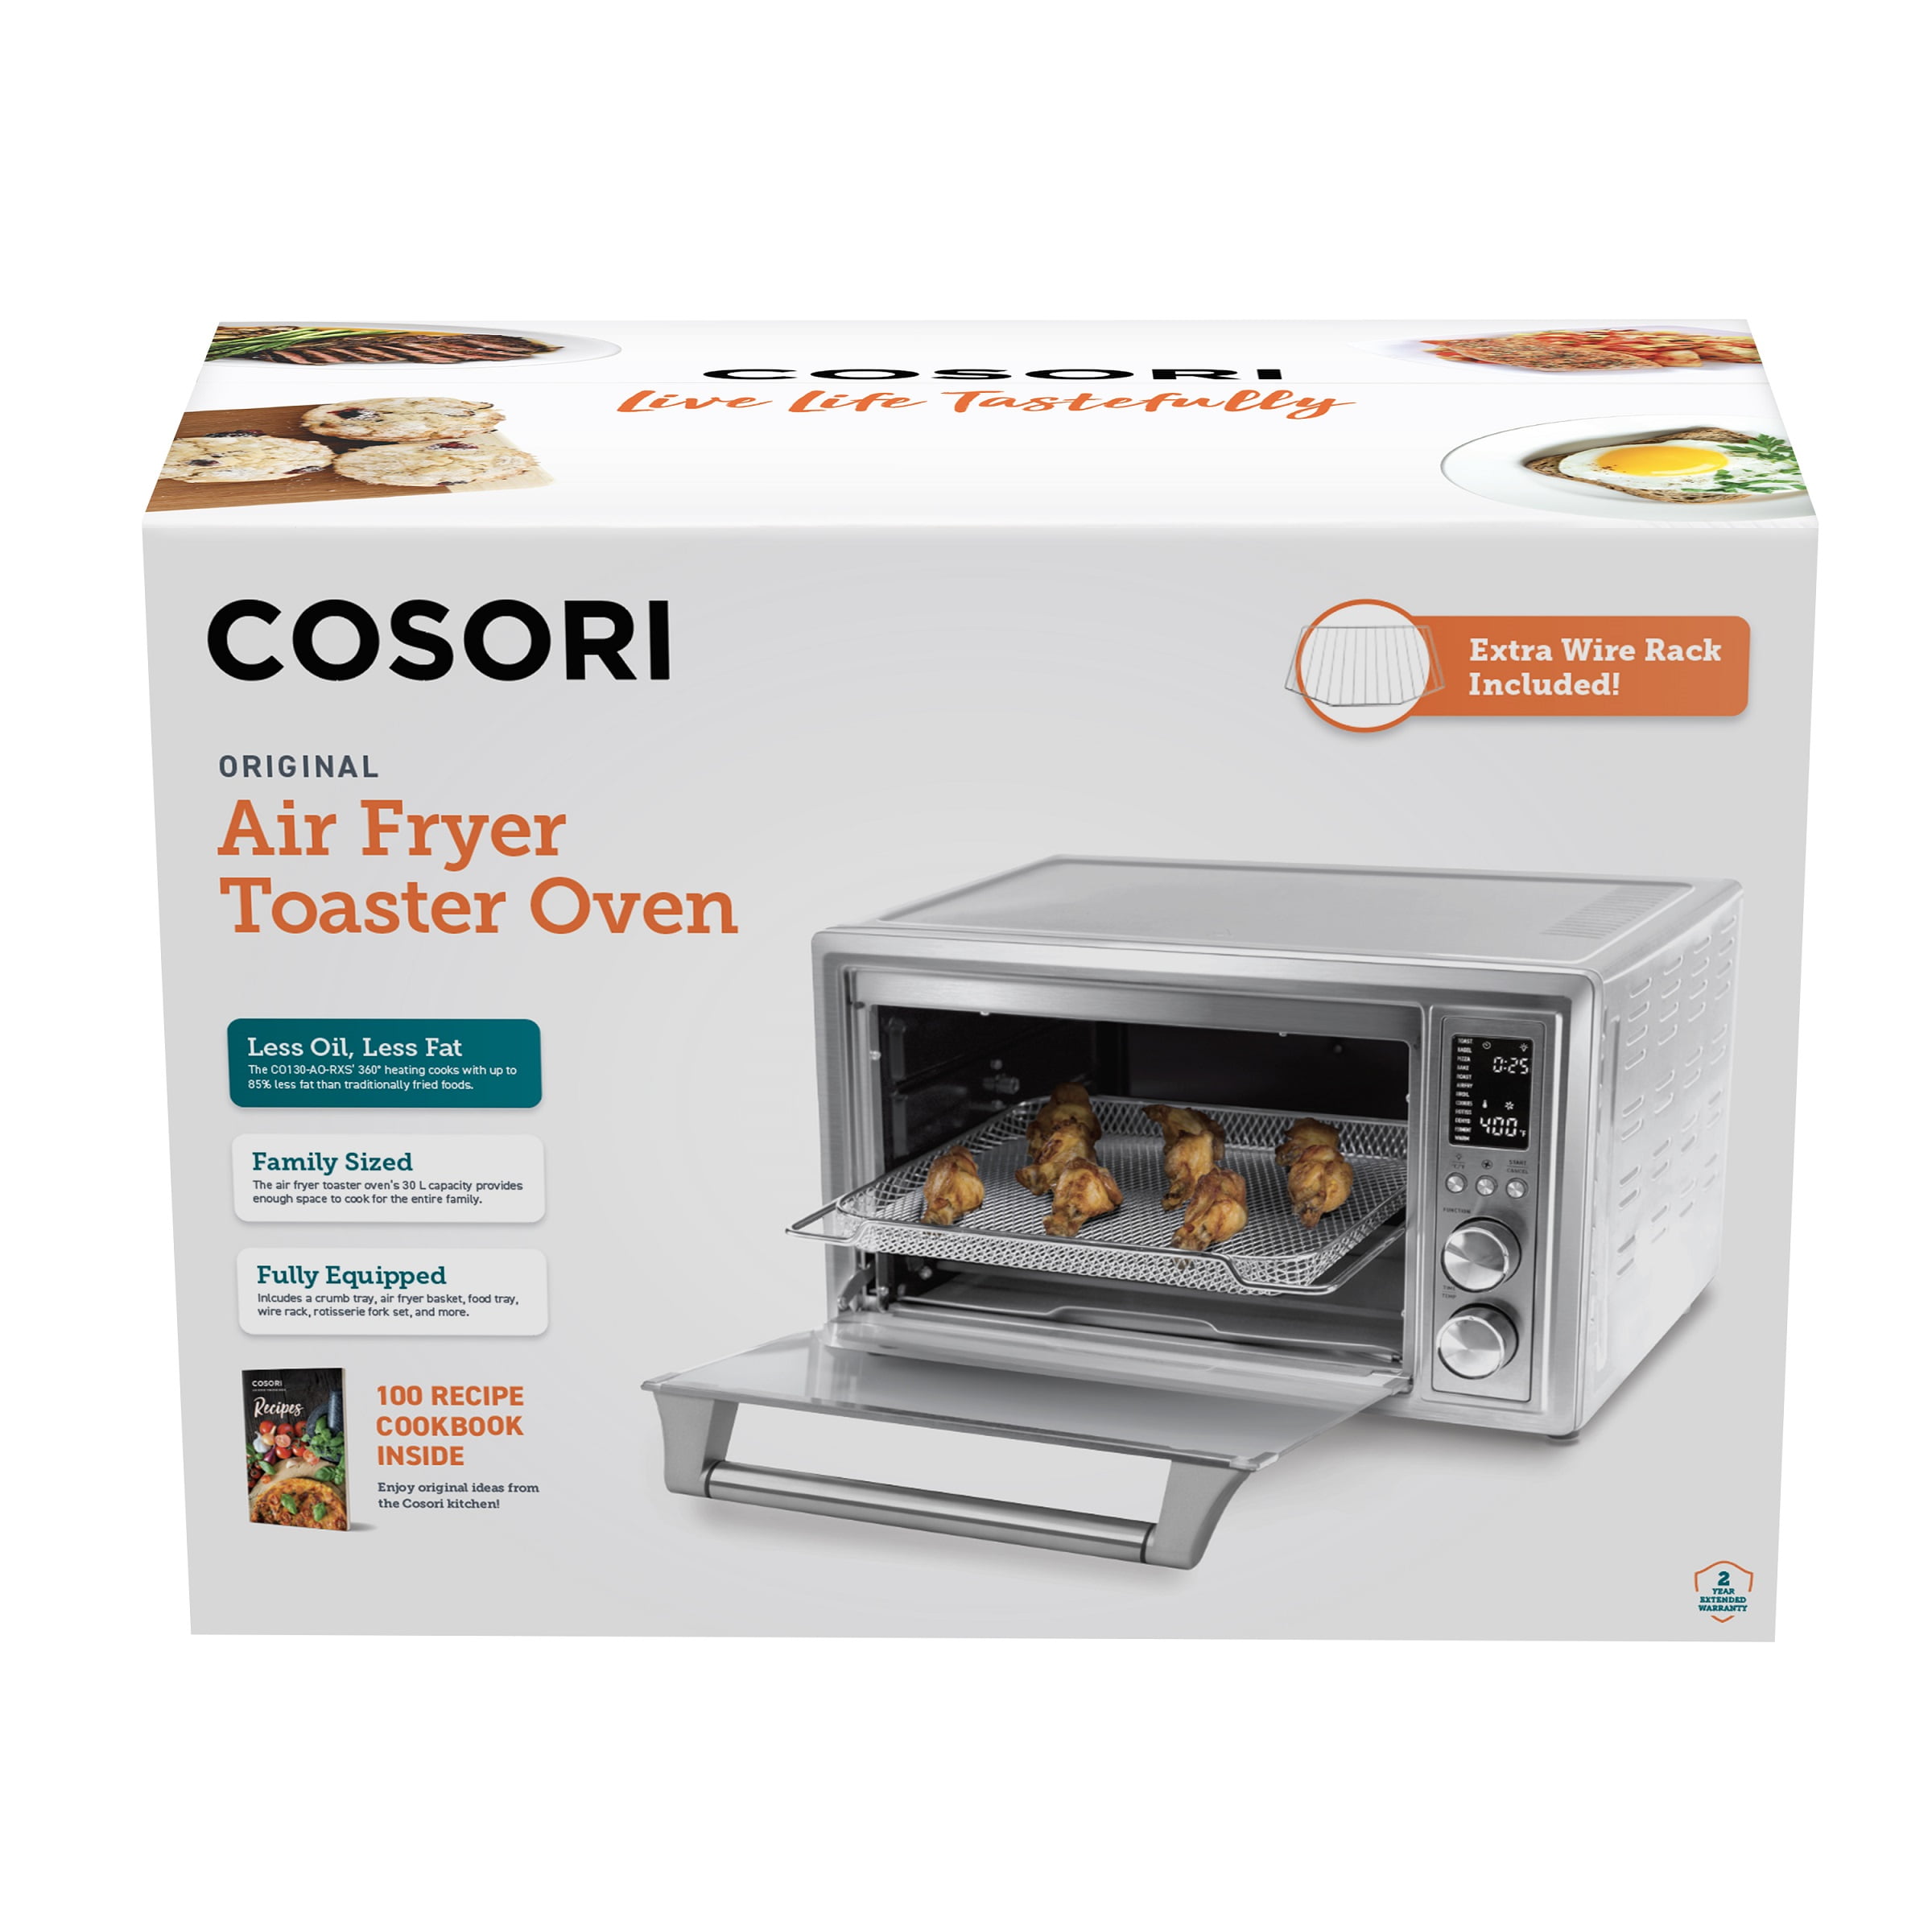 COSORI CO130-AO Oven Air Fryer with Accessories - Silver for sale online